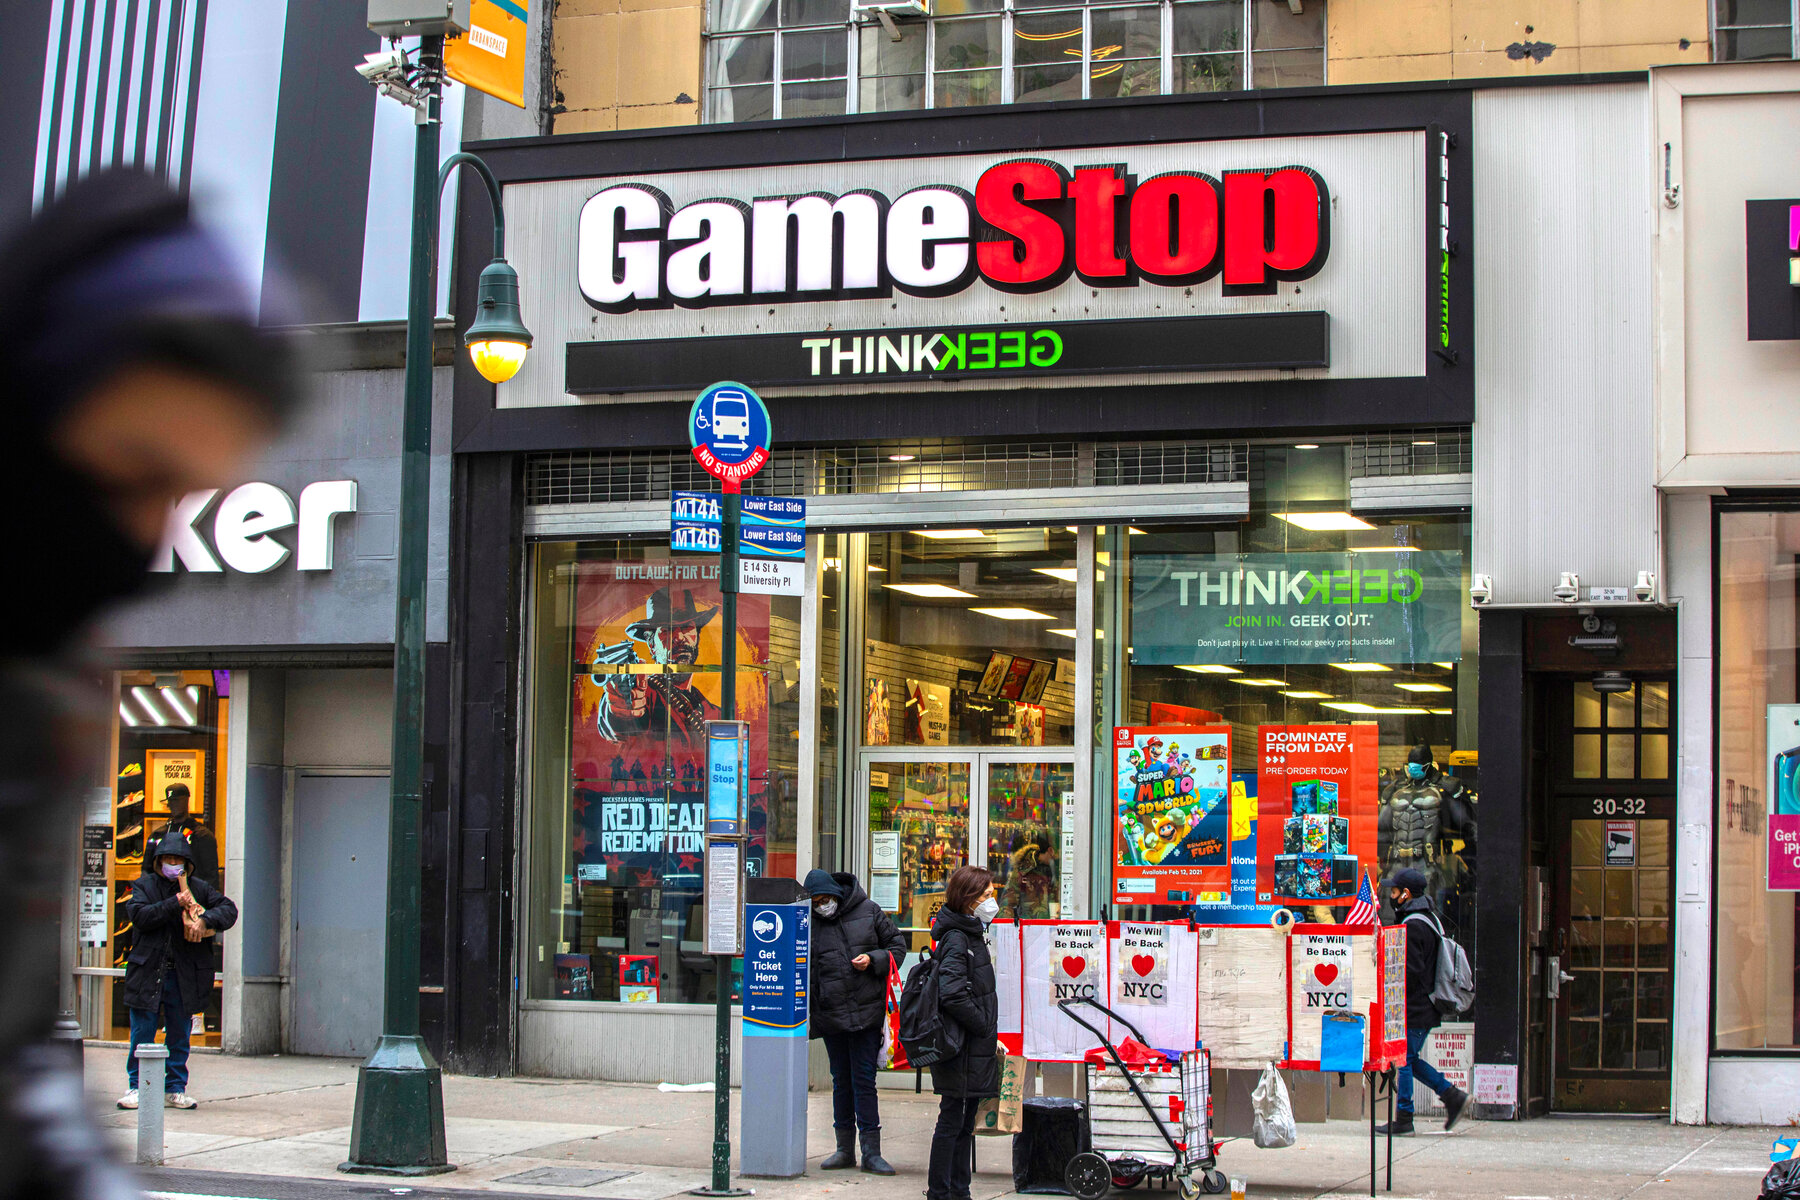 Business of Esports Gamestop Announces Plans To Expand Into Other Markets